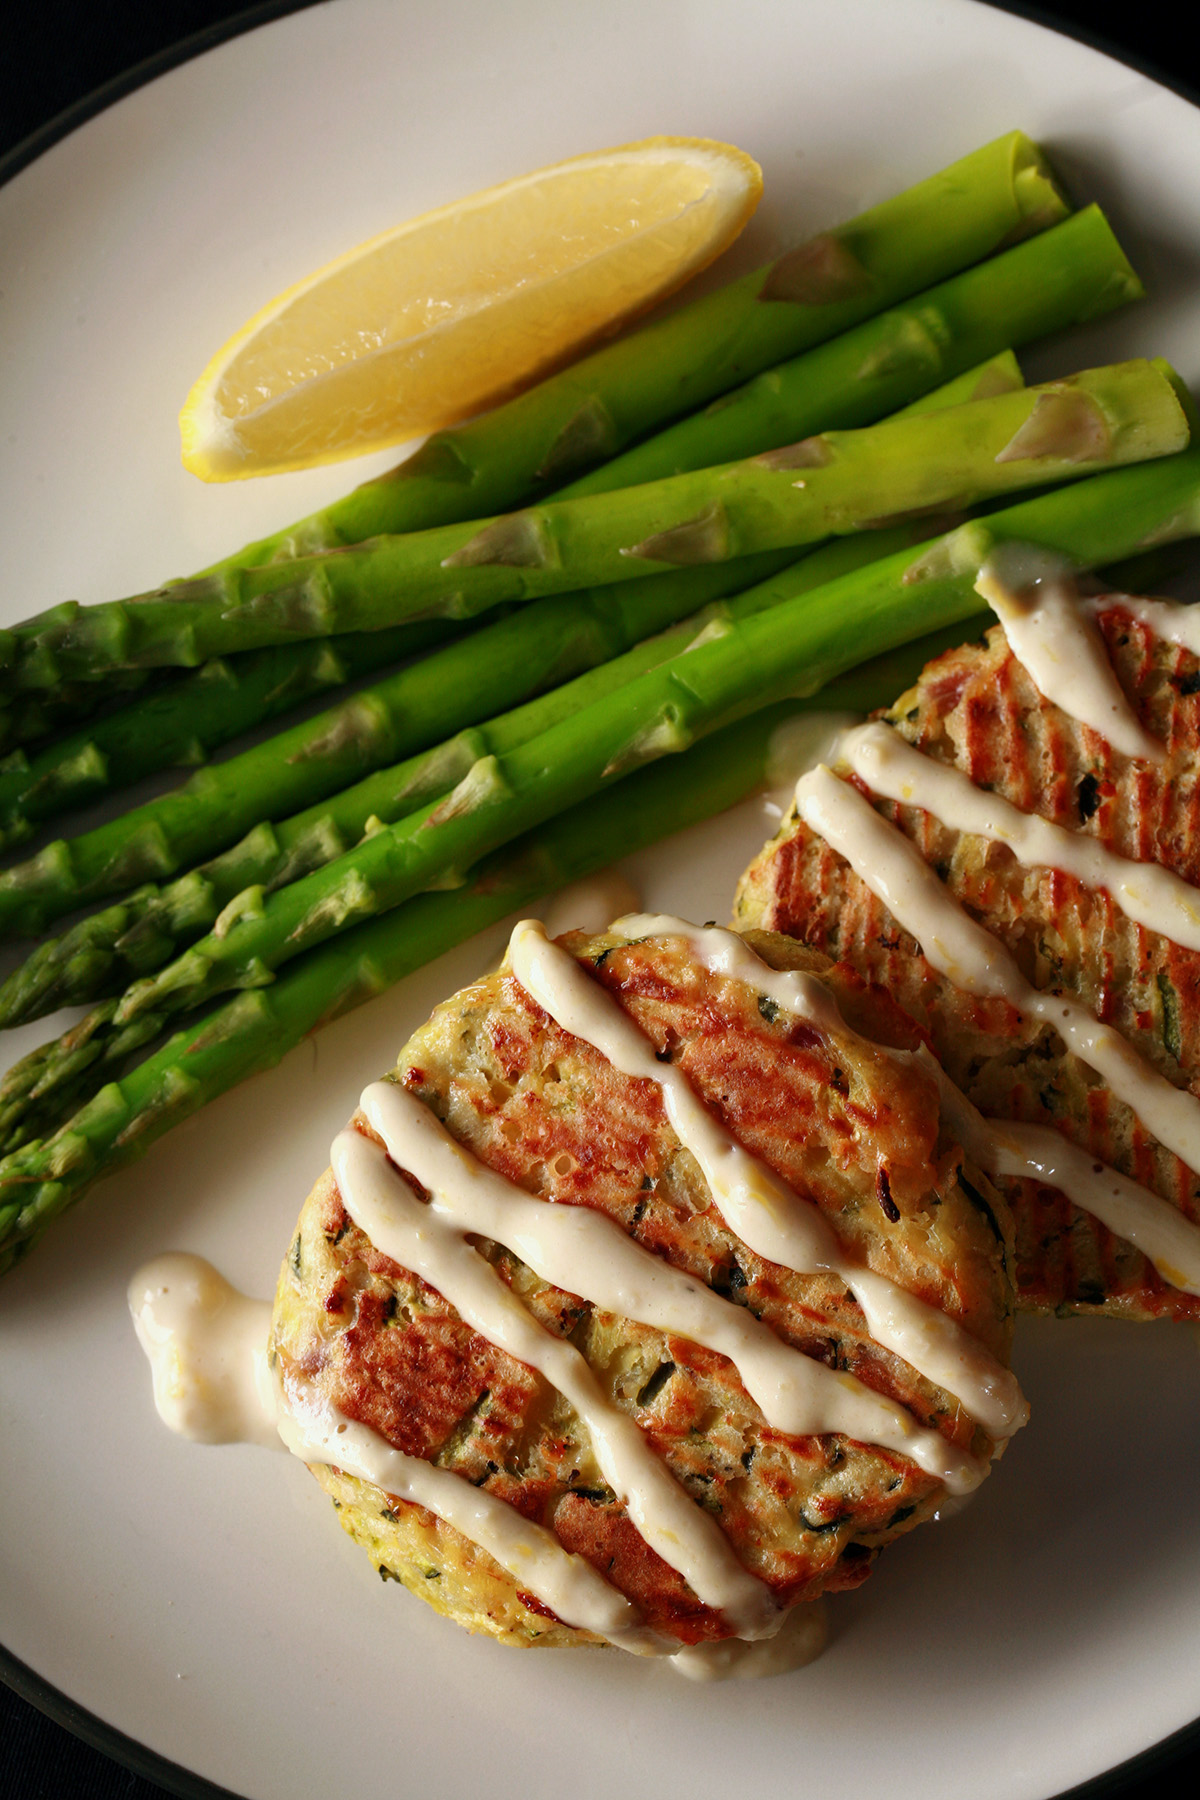 2 baked low carb zucchini patties, drizzled with lemon tahini sauce.